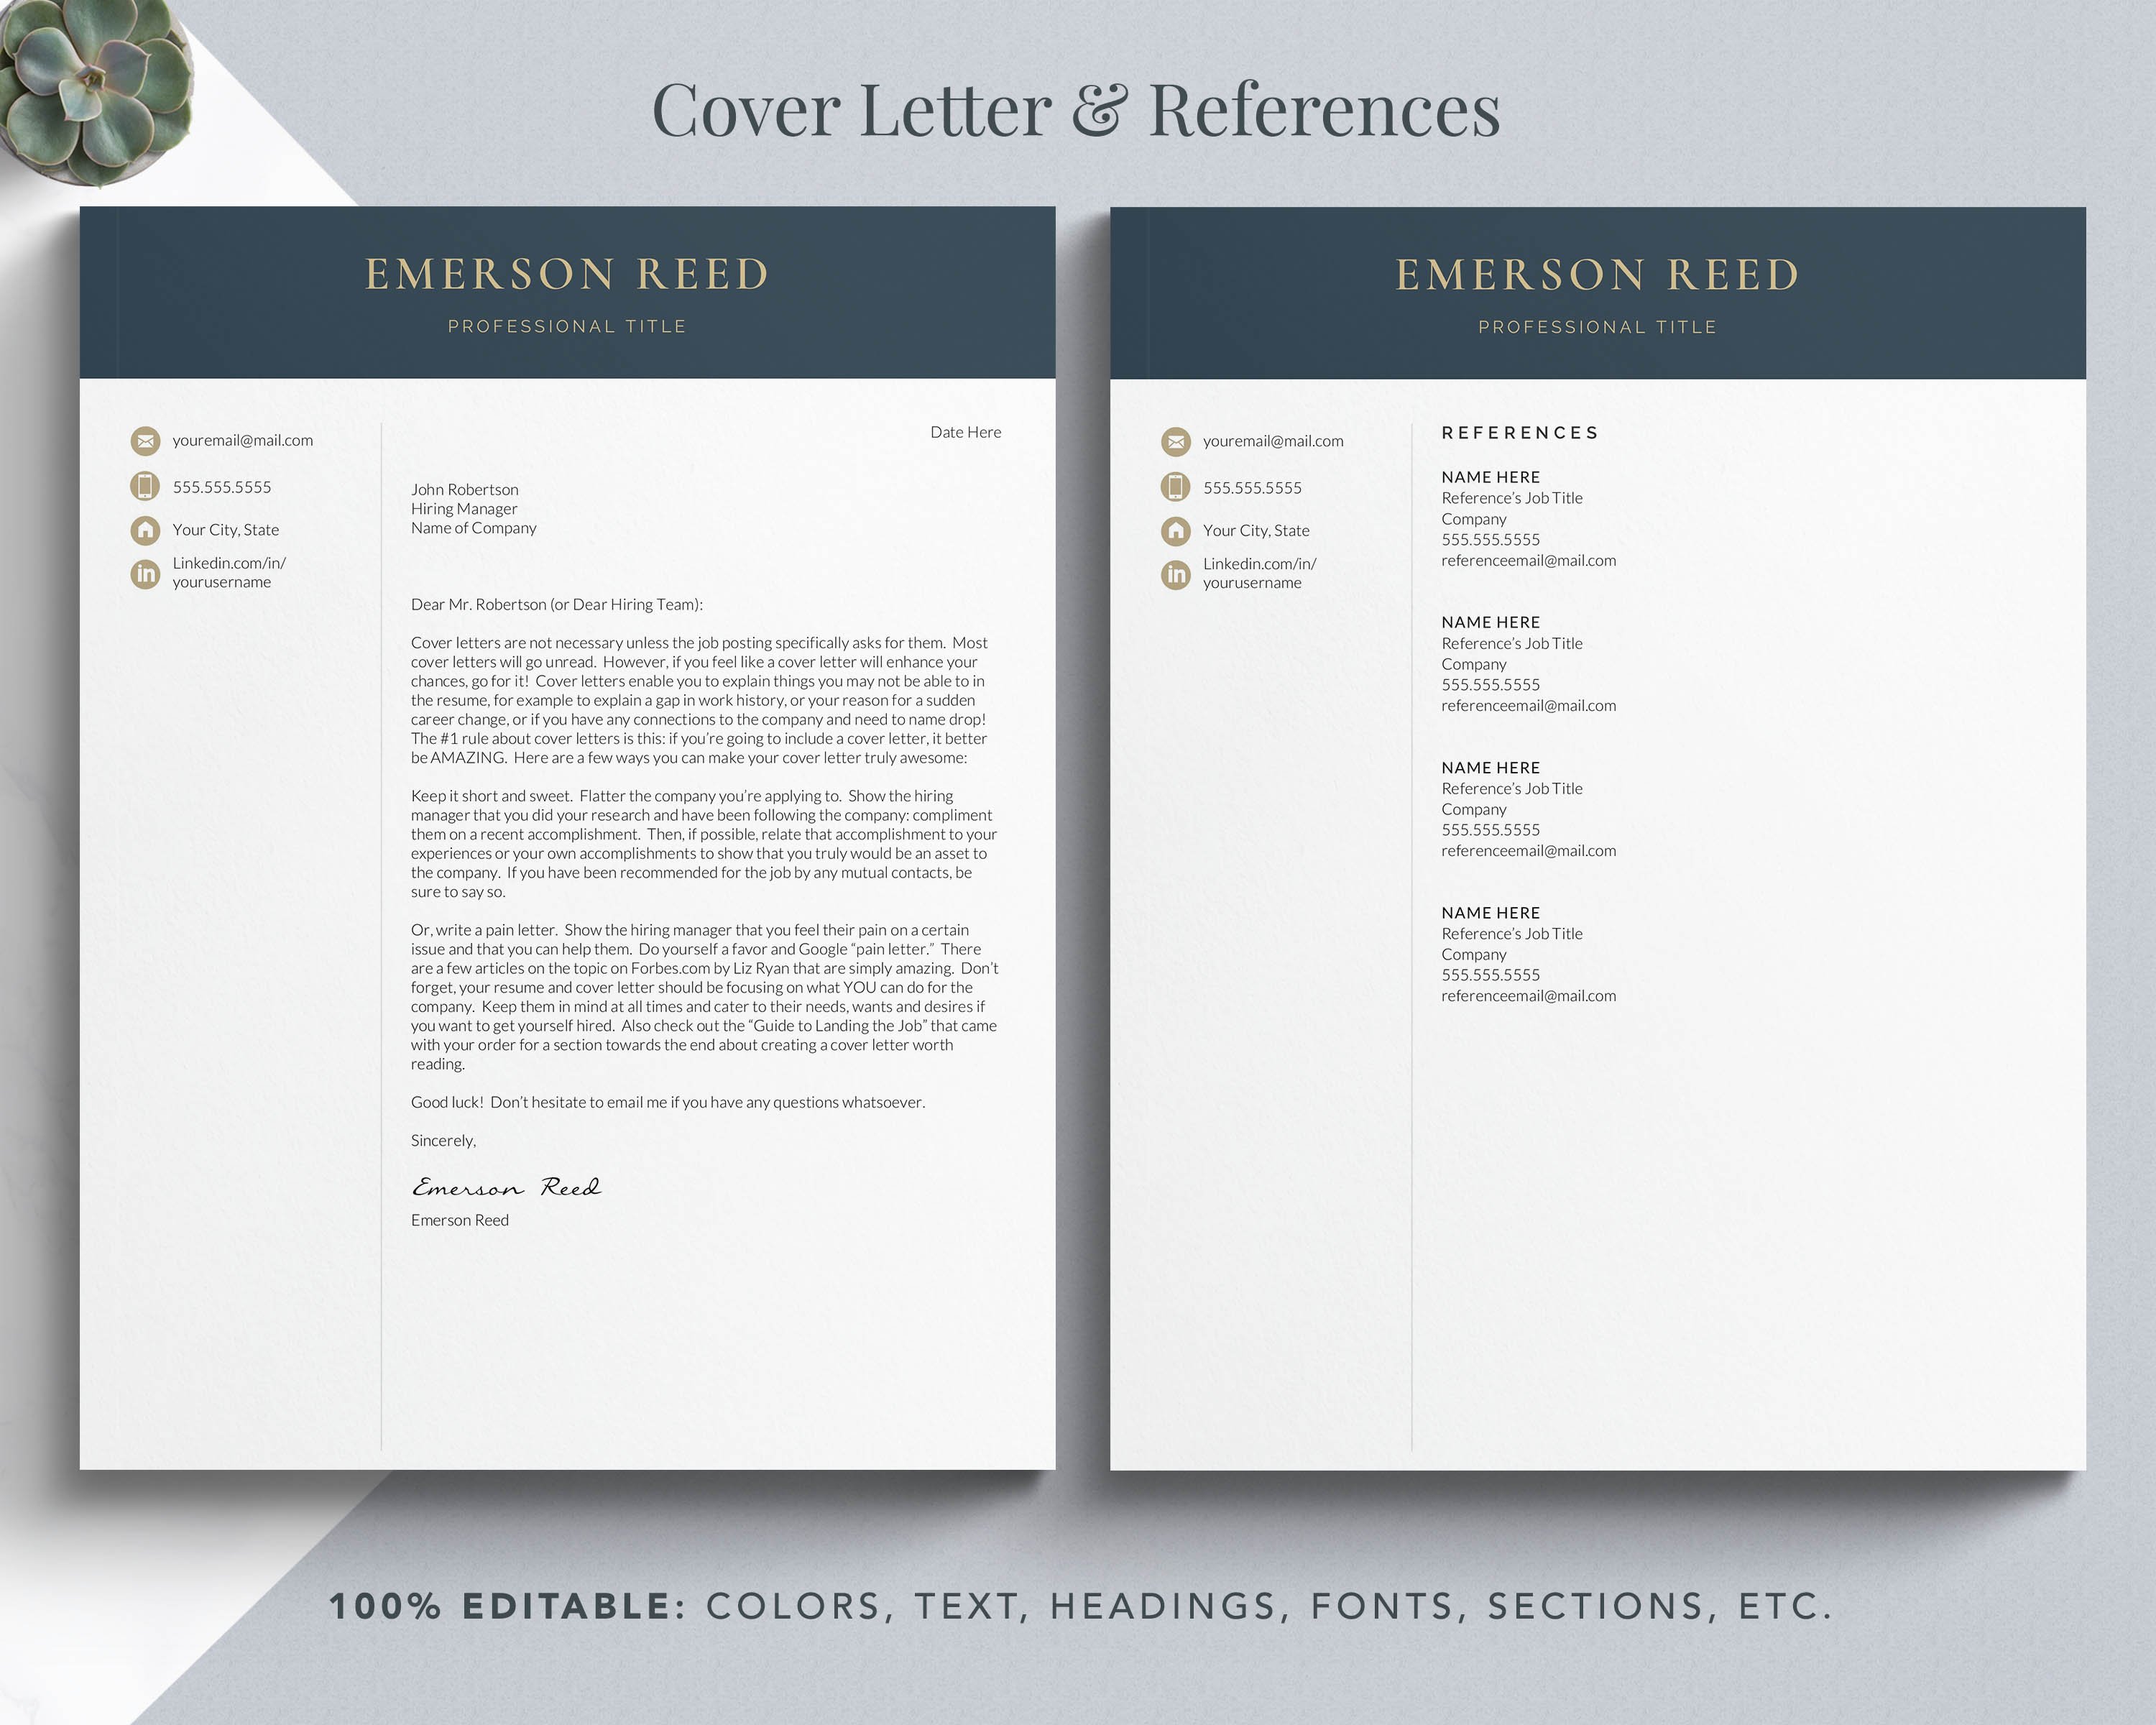 executive resume cover letter references 518